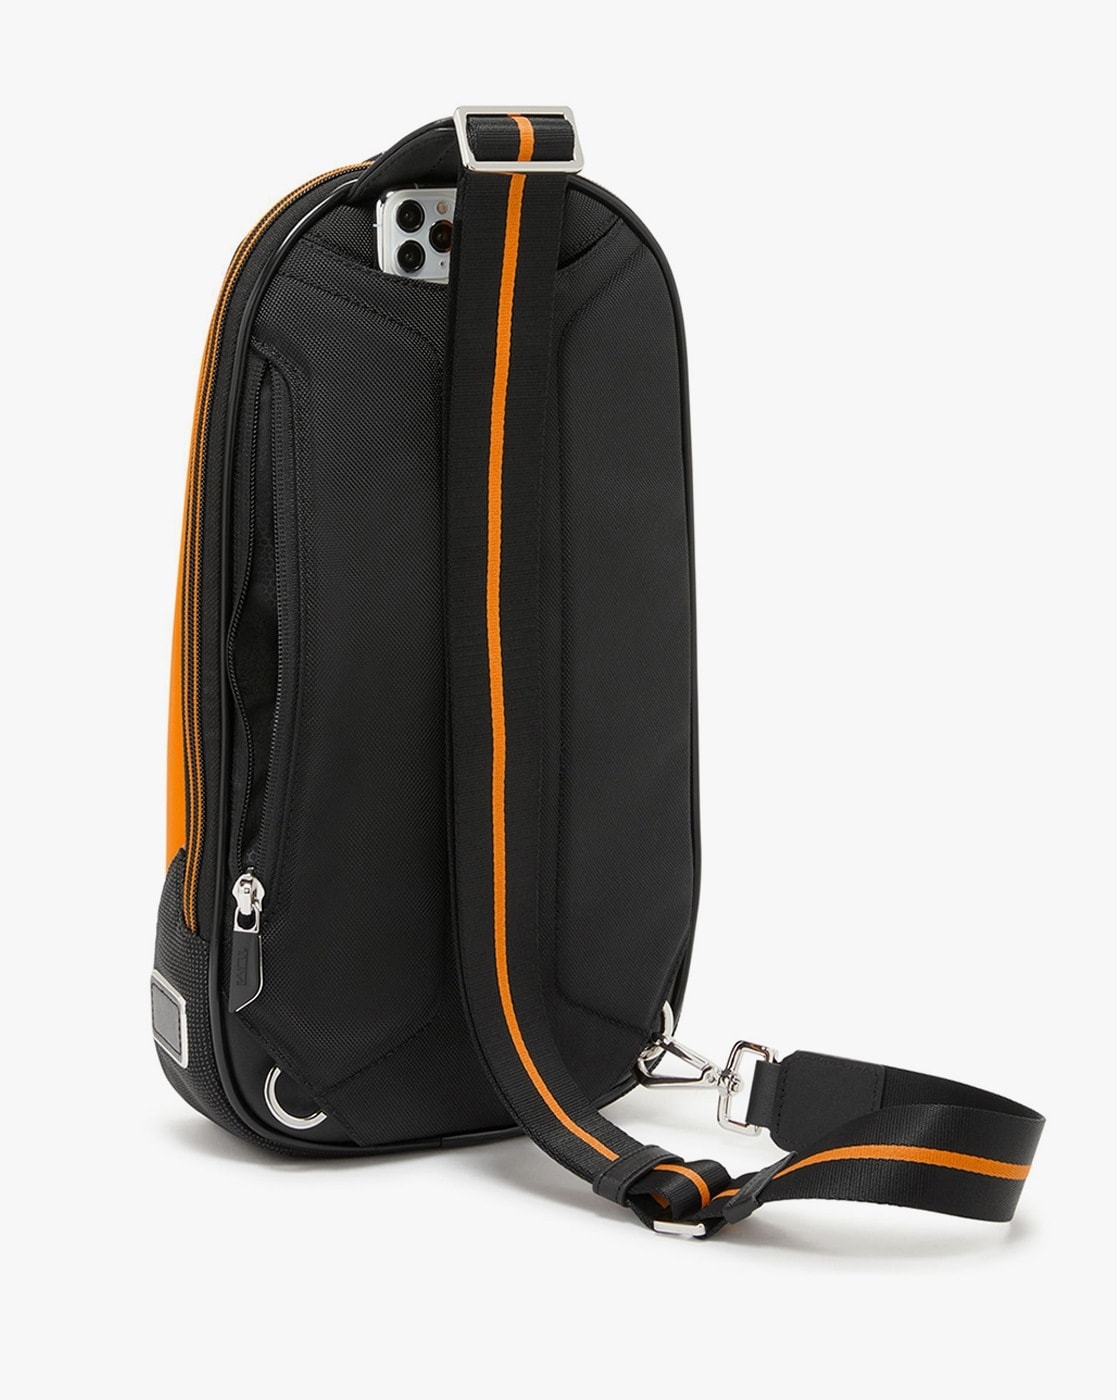 Lookout Expandable Sling | Tumi US